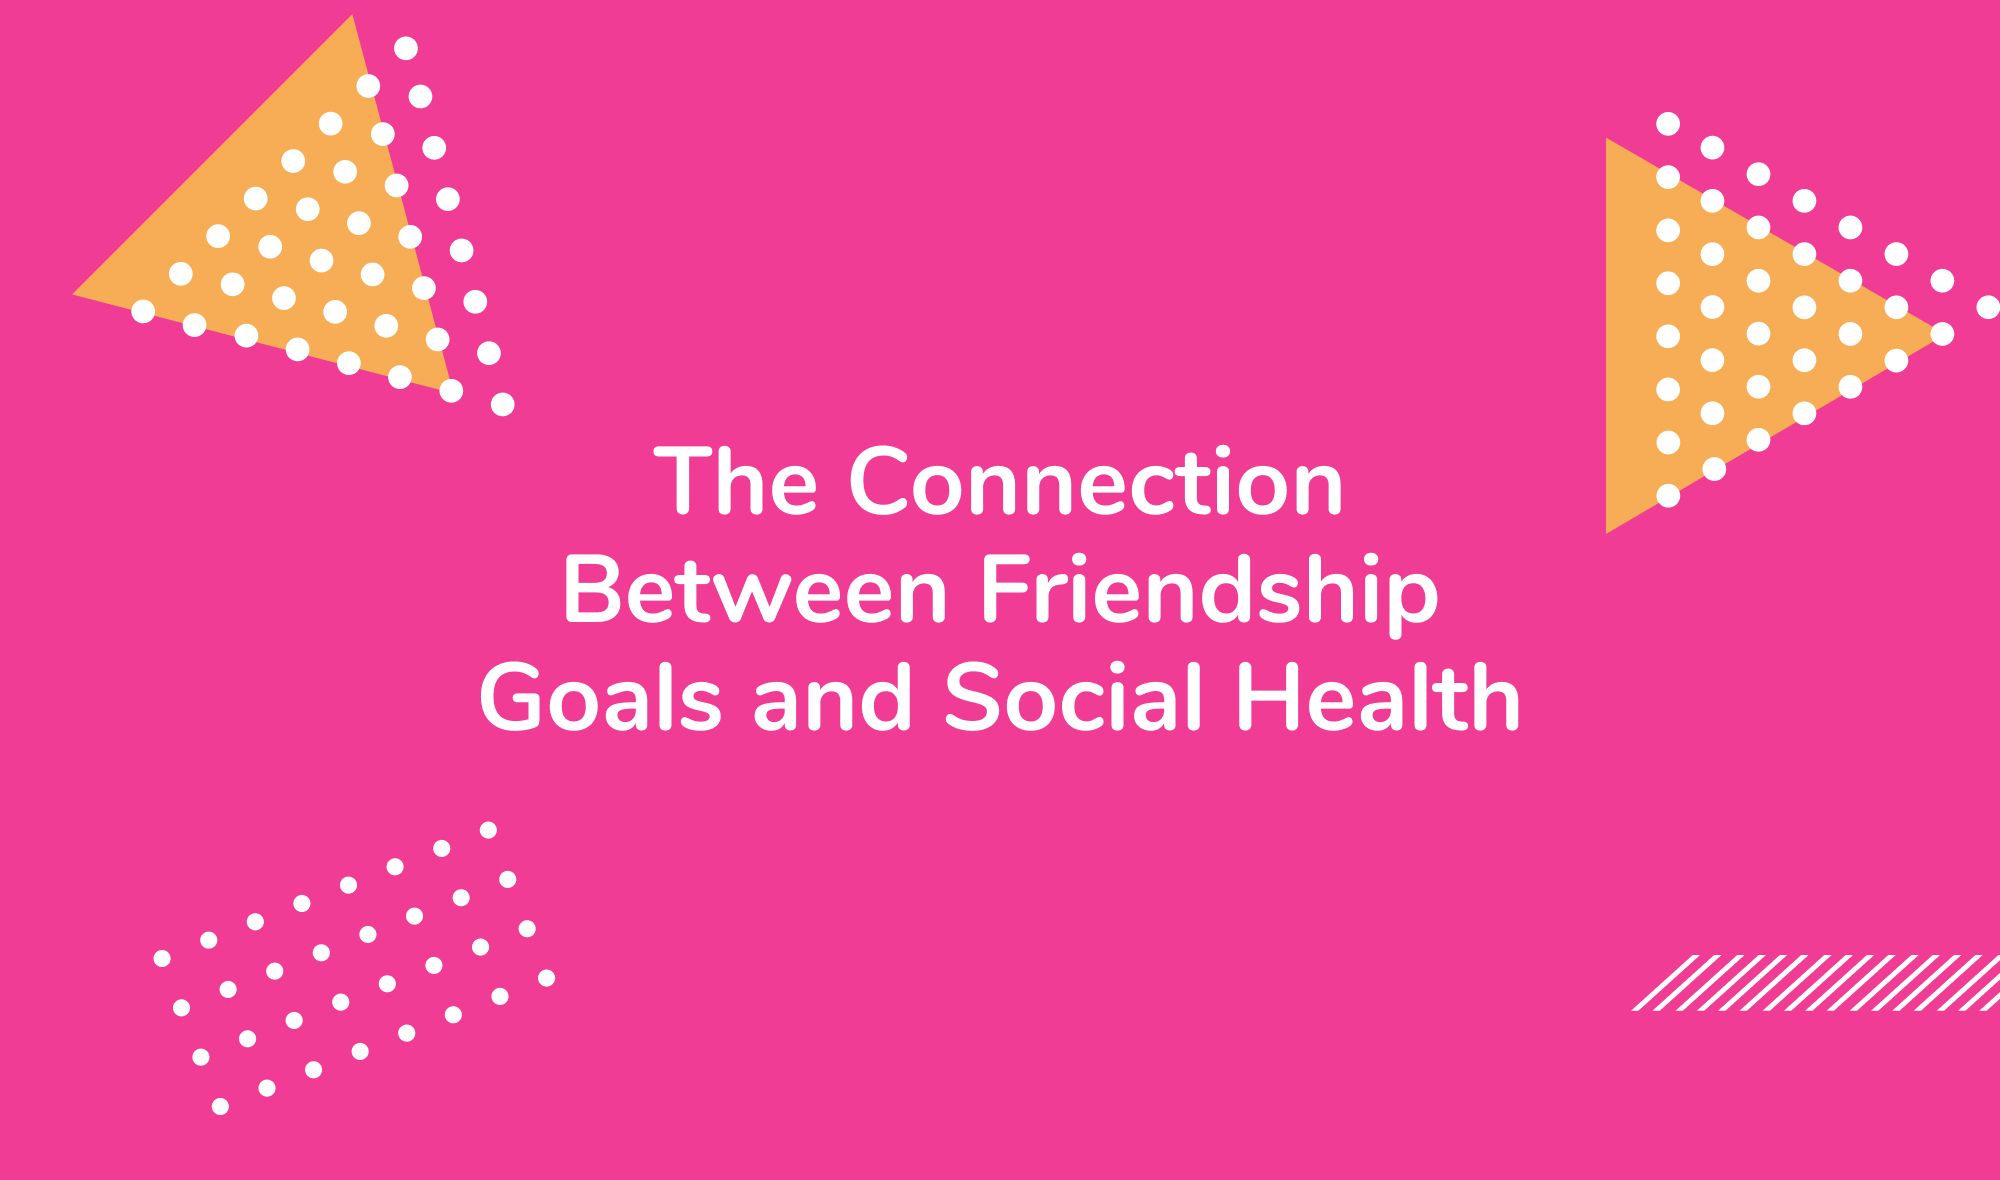 The Connection Between Friendship Goals and Social Health